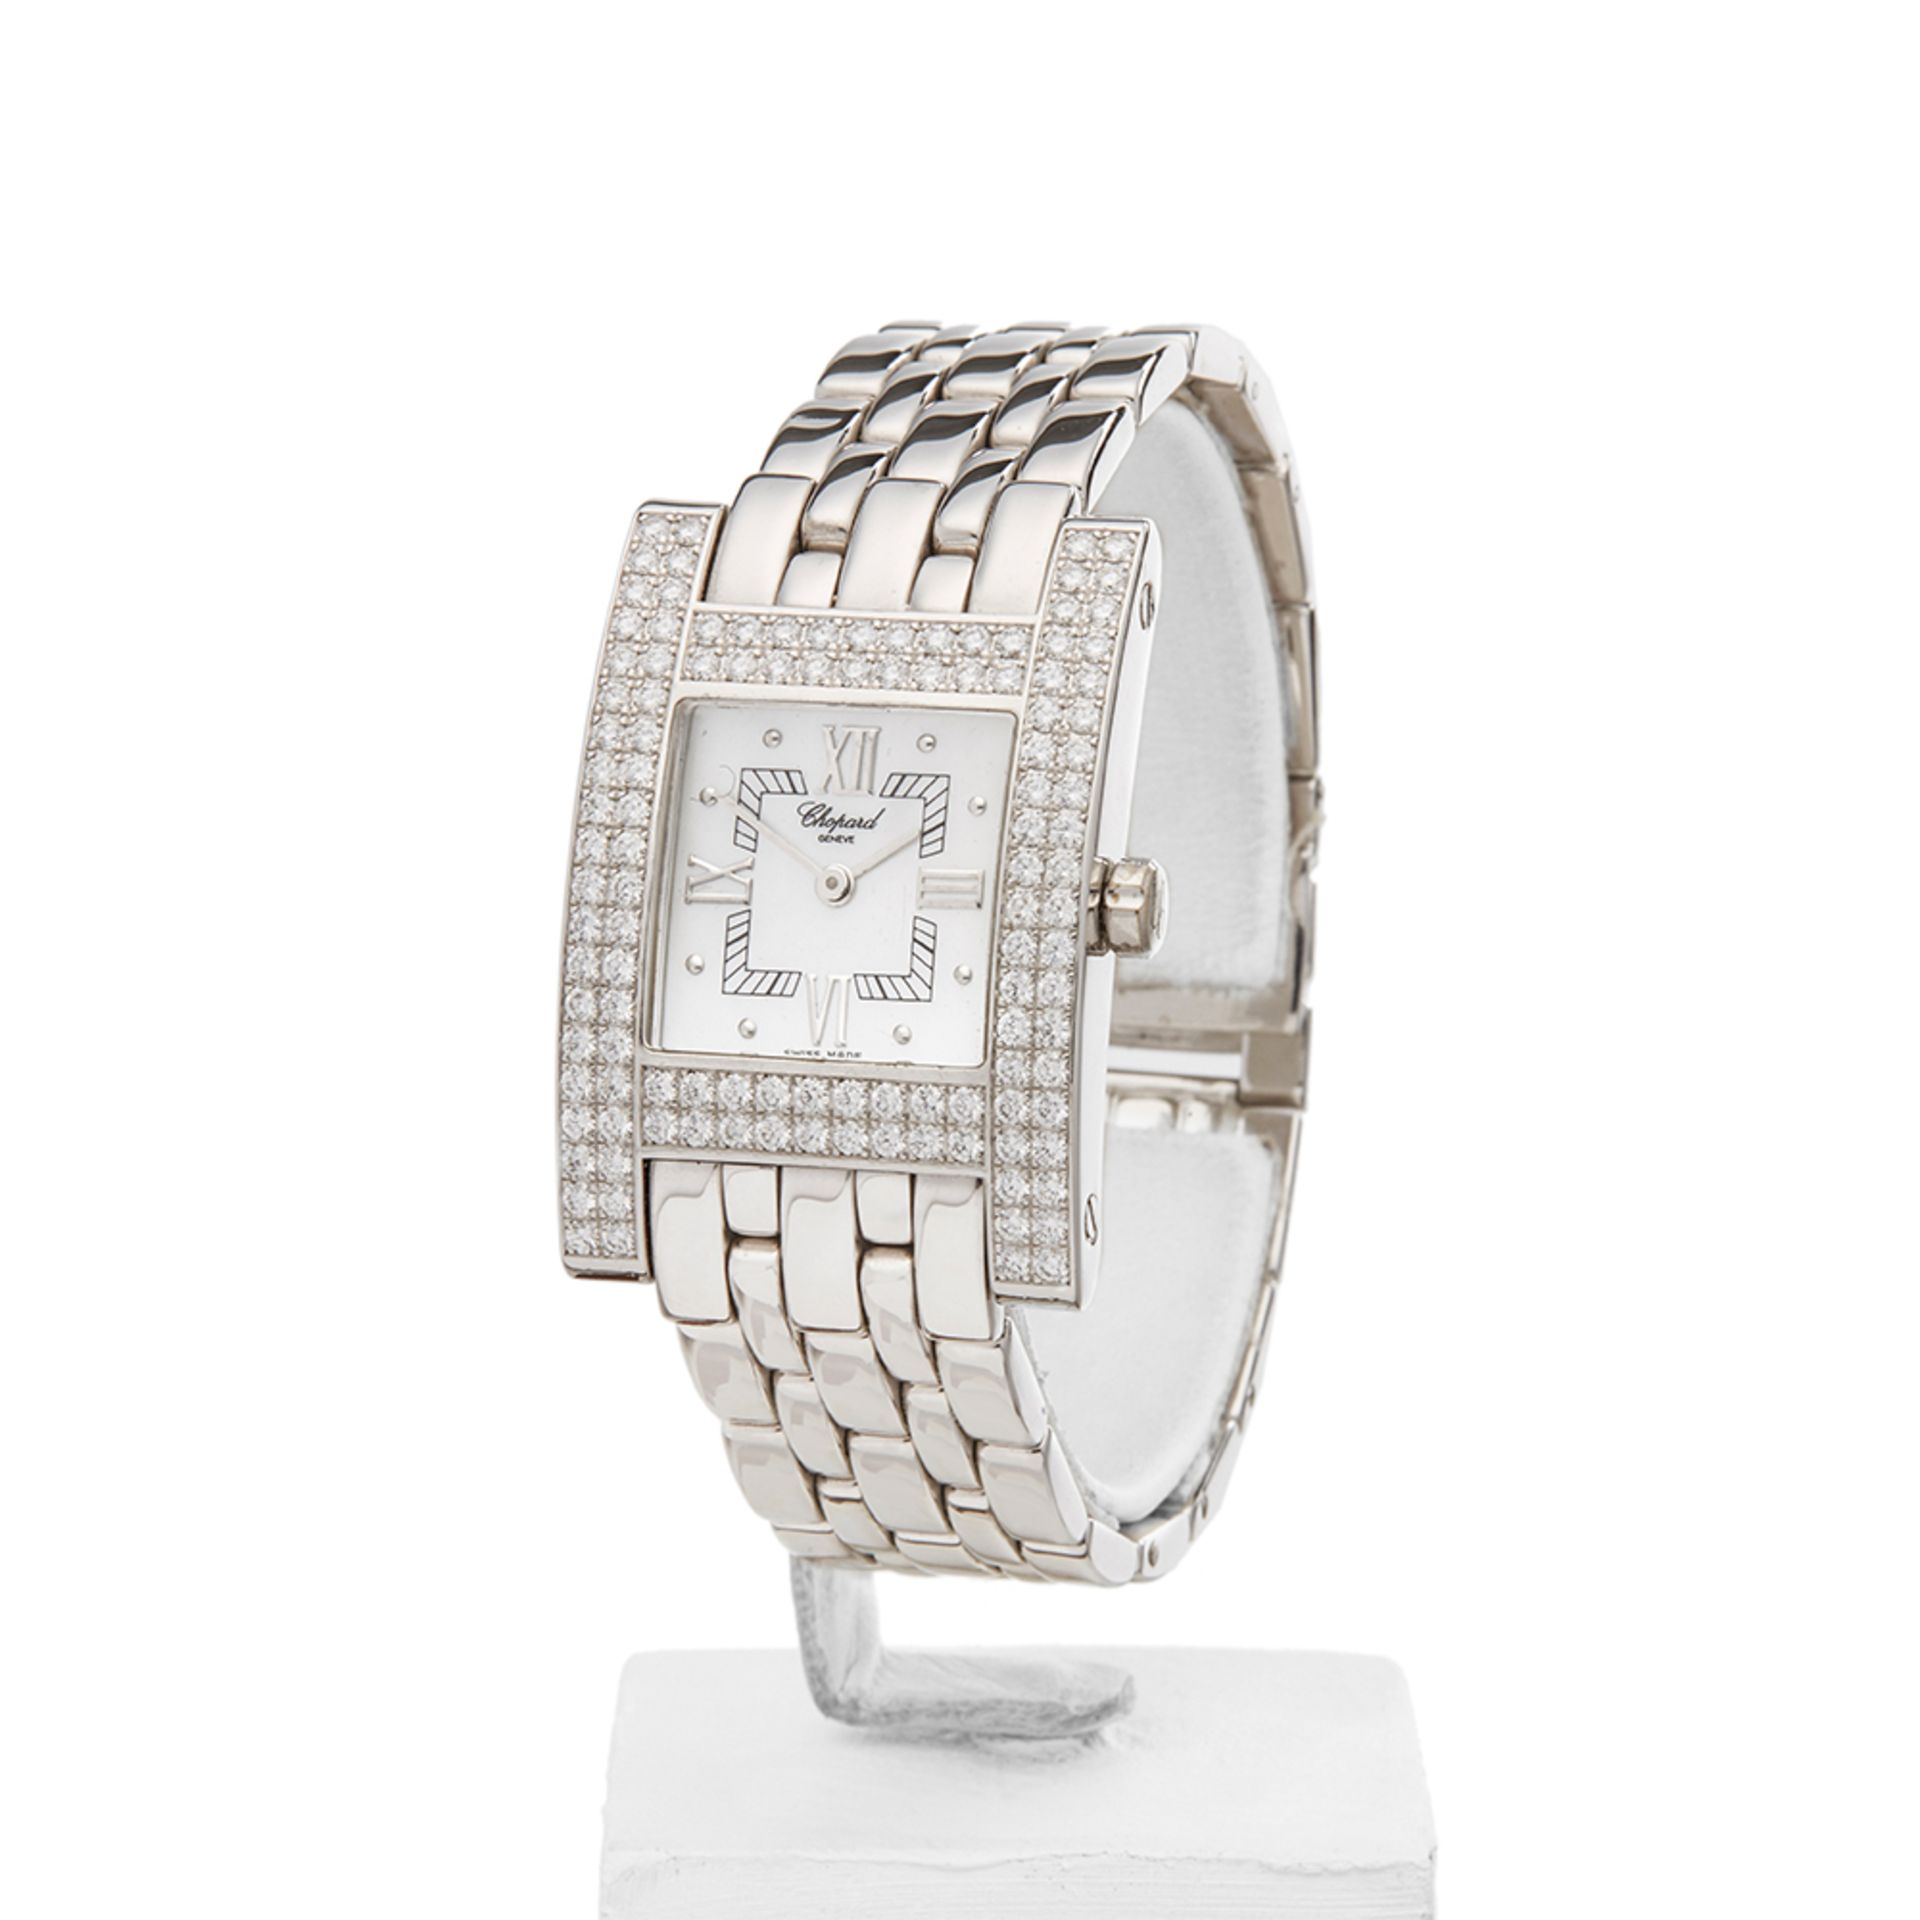 Chopard Your Hour Original Diamond 25mm 18k White Gold - 13/6621 - Image 3 of 9